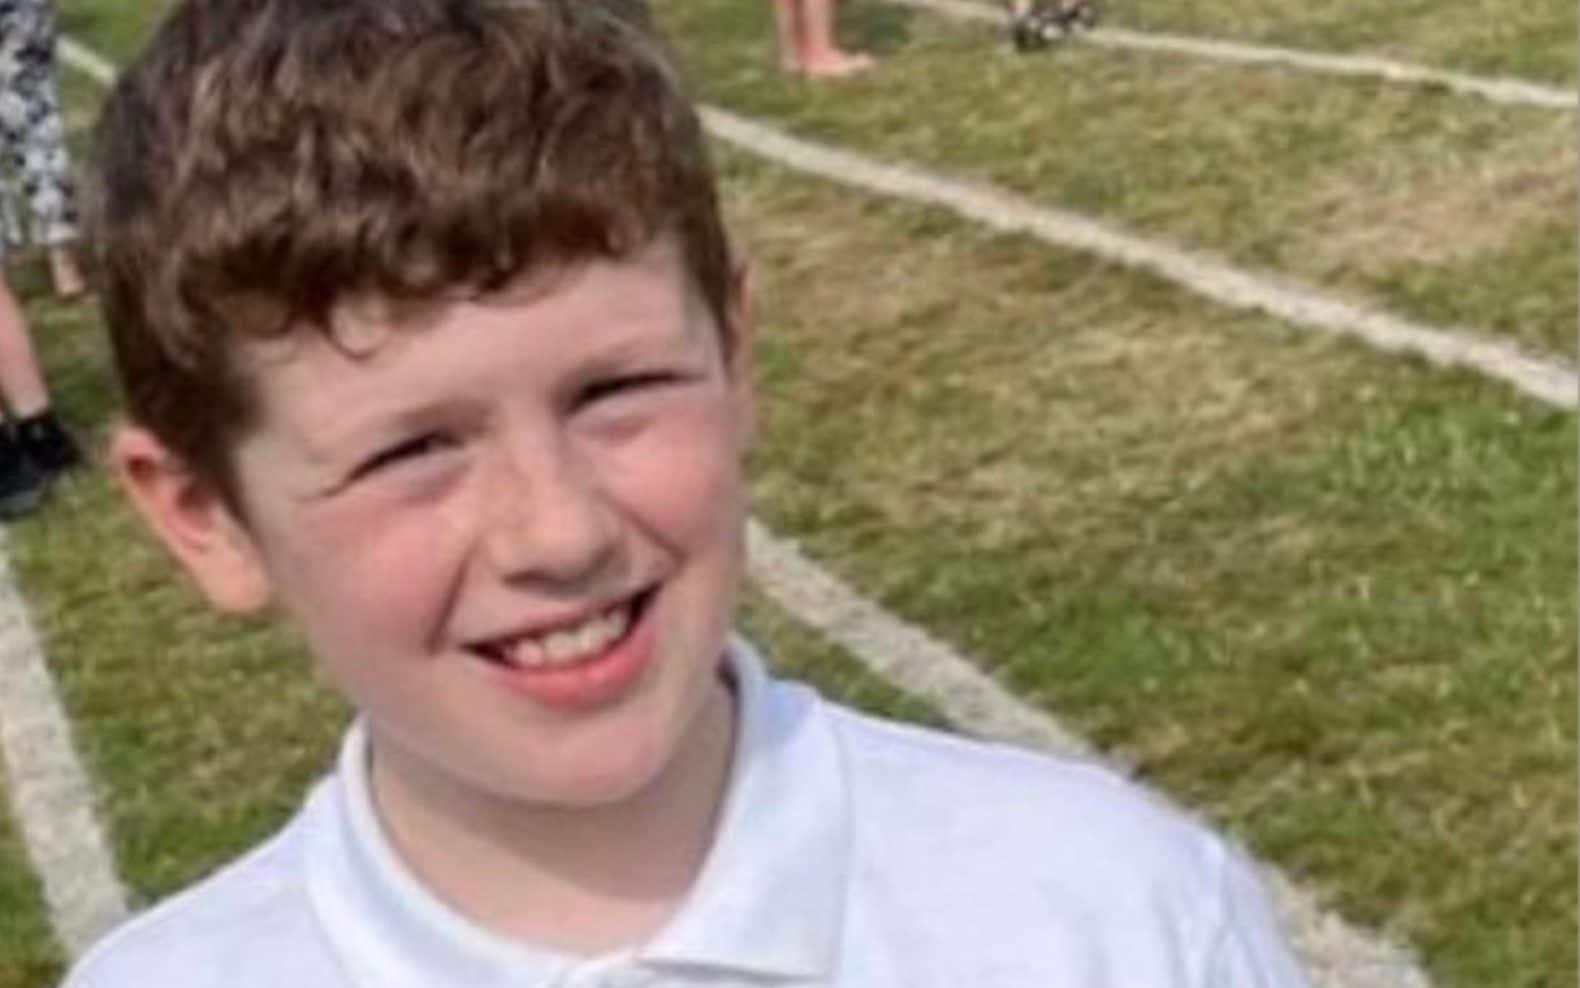 NHS could have saved life of boy who died from sepsis, coroner rules